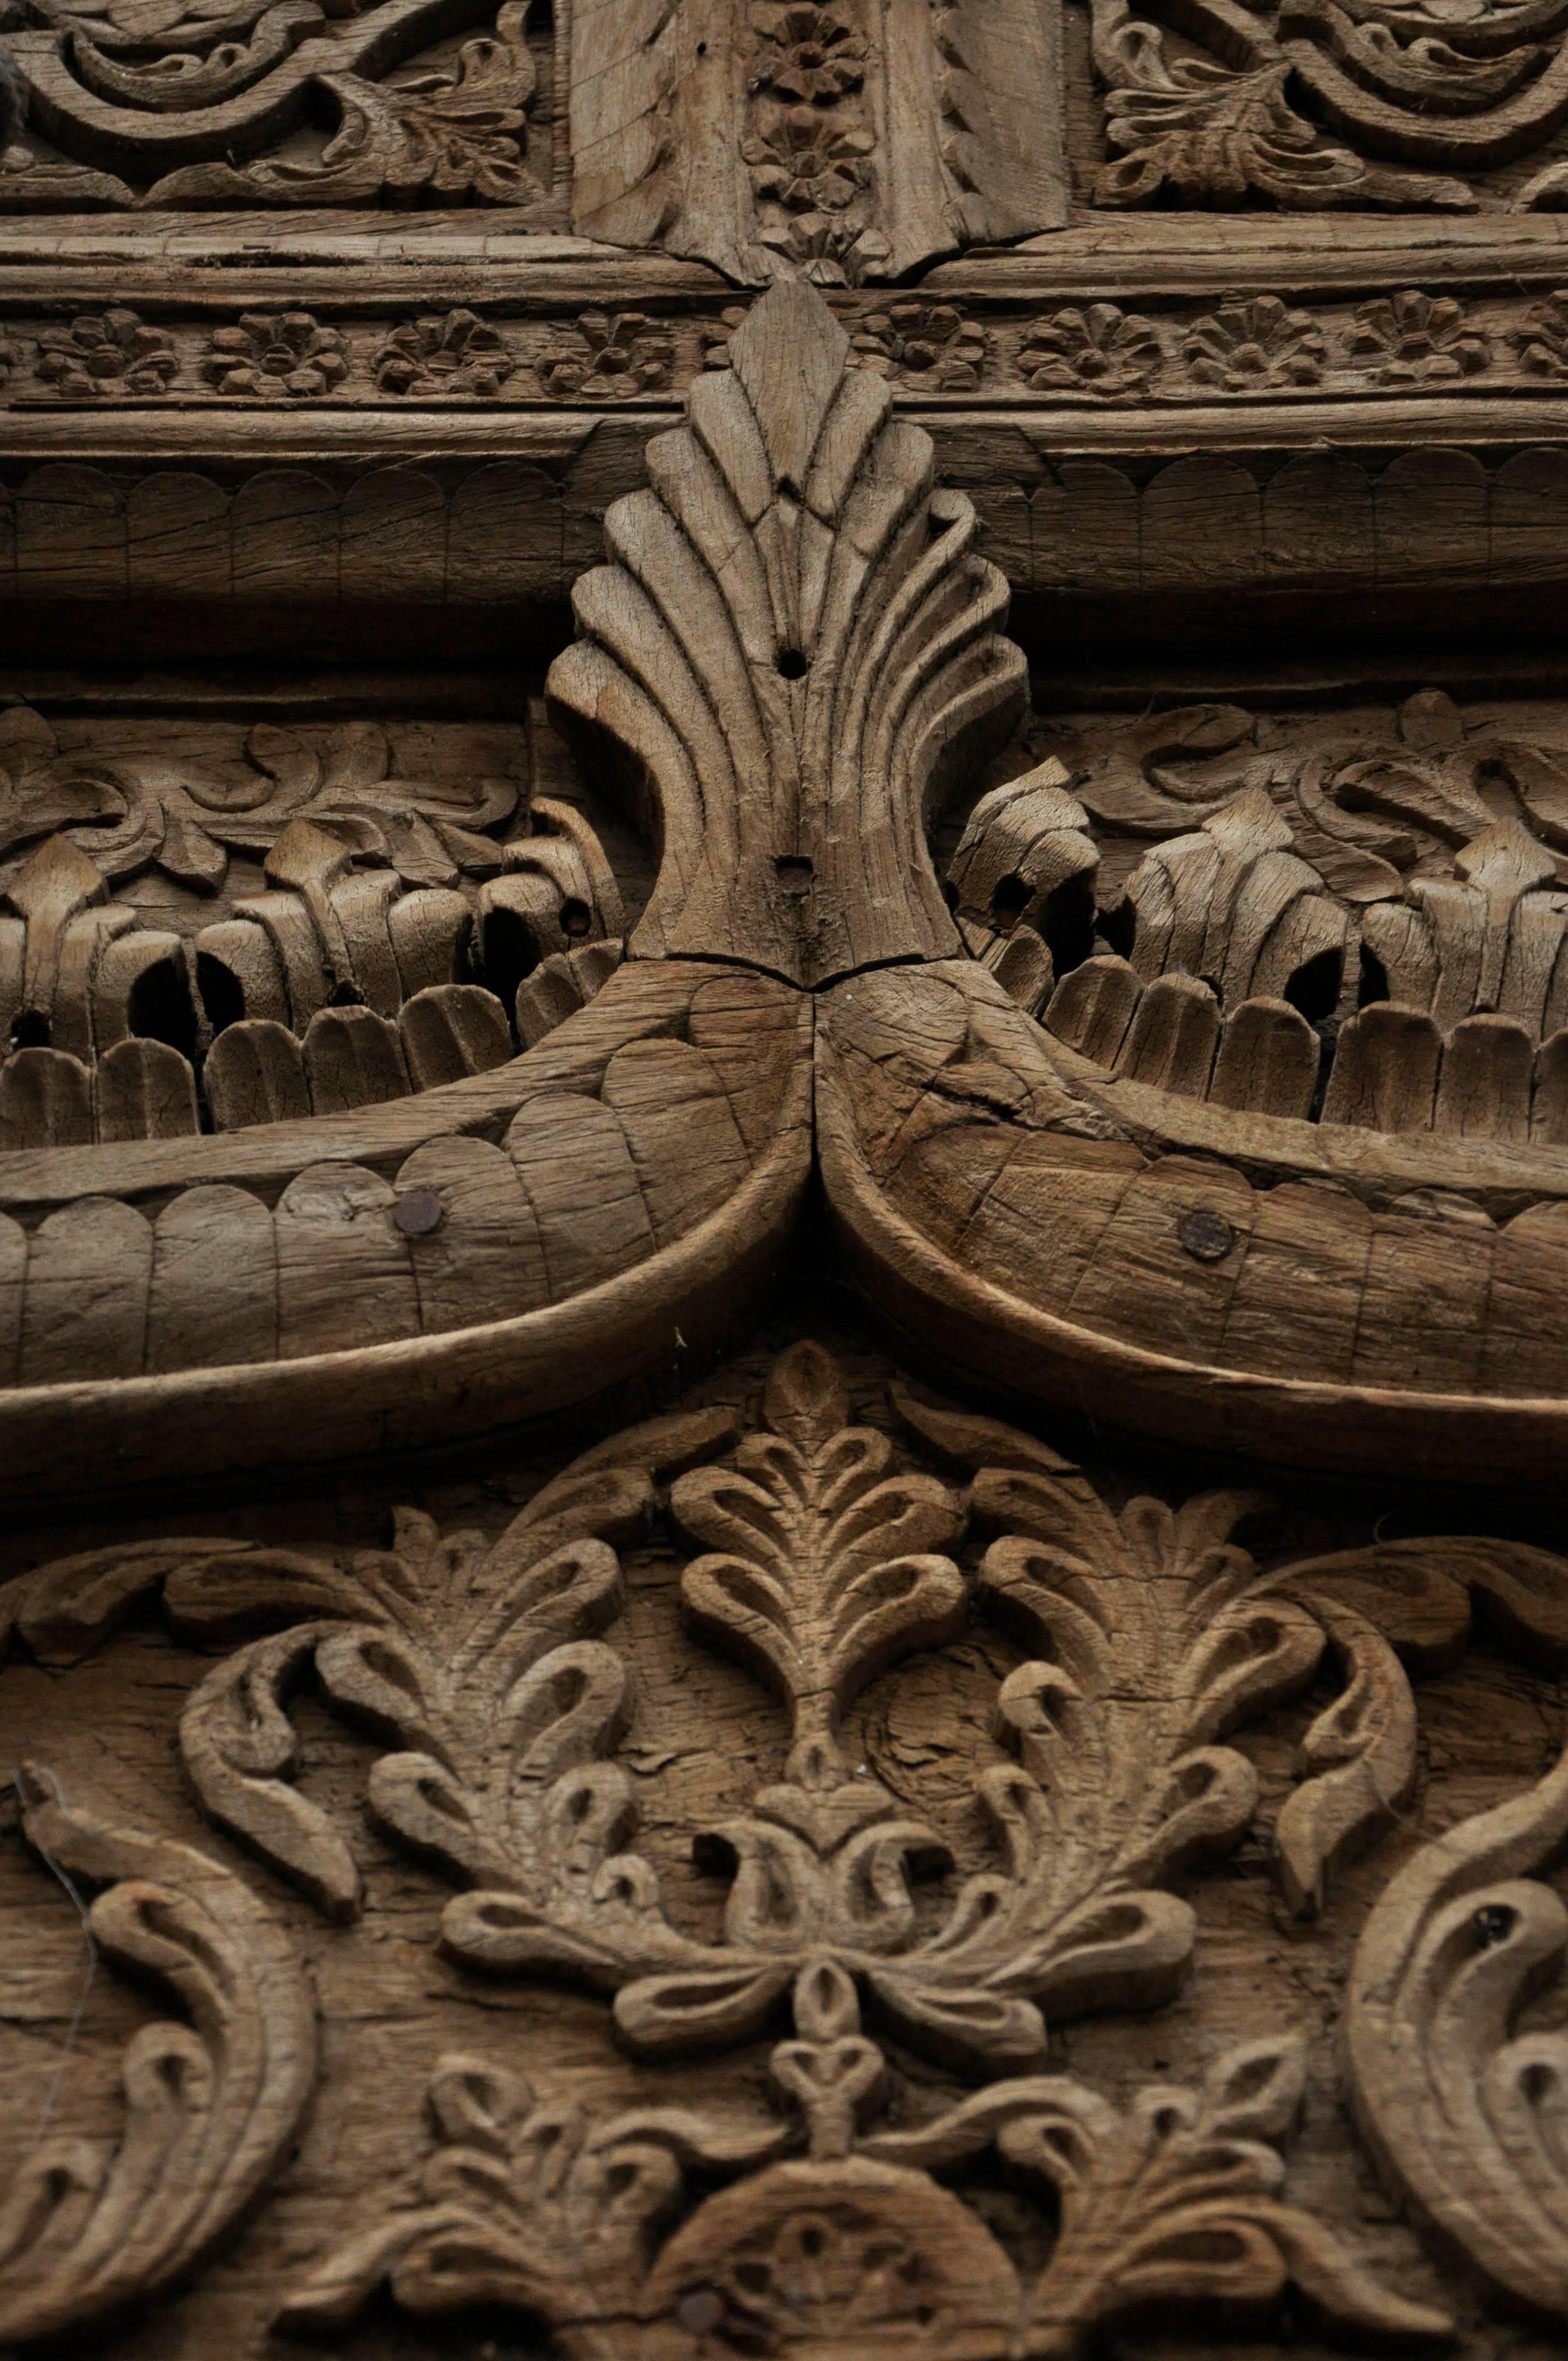 Set of door and window frame made out of carved wood in India during the 19th century. Beautiful carving work.